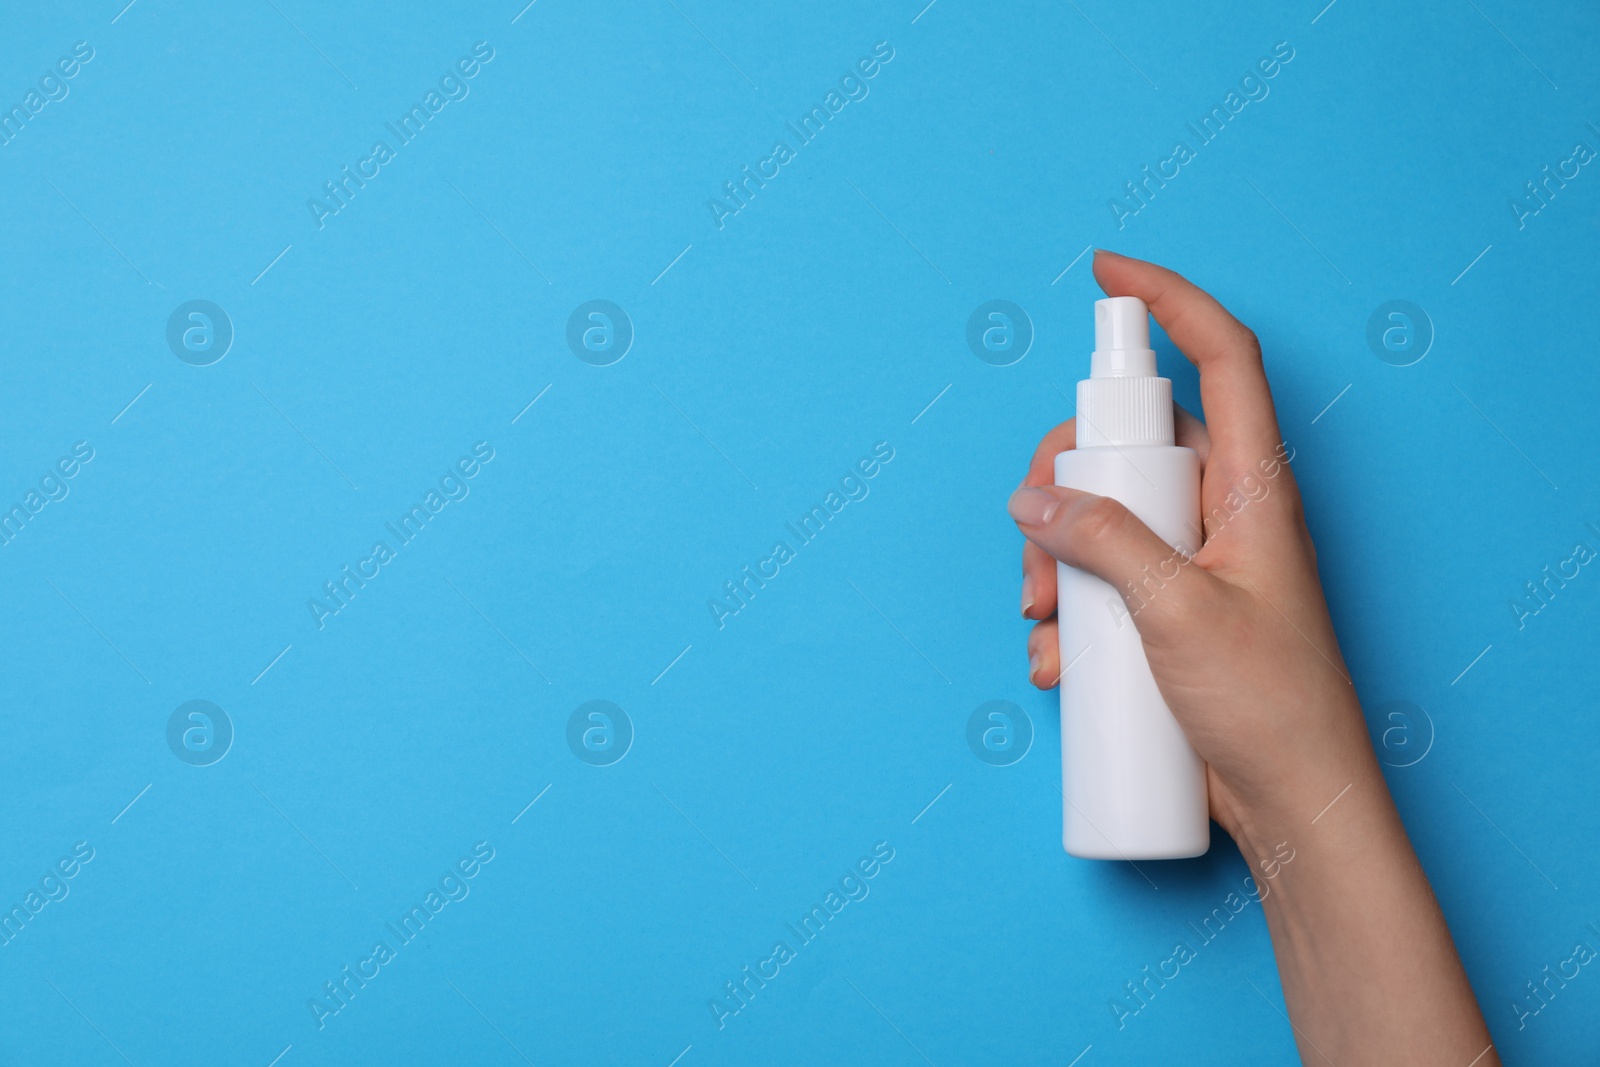 Photo of Woman holding hand sanitizer on light blue background, closeup view with space for text. Safety equipment